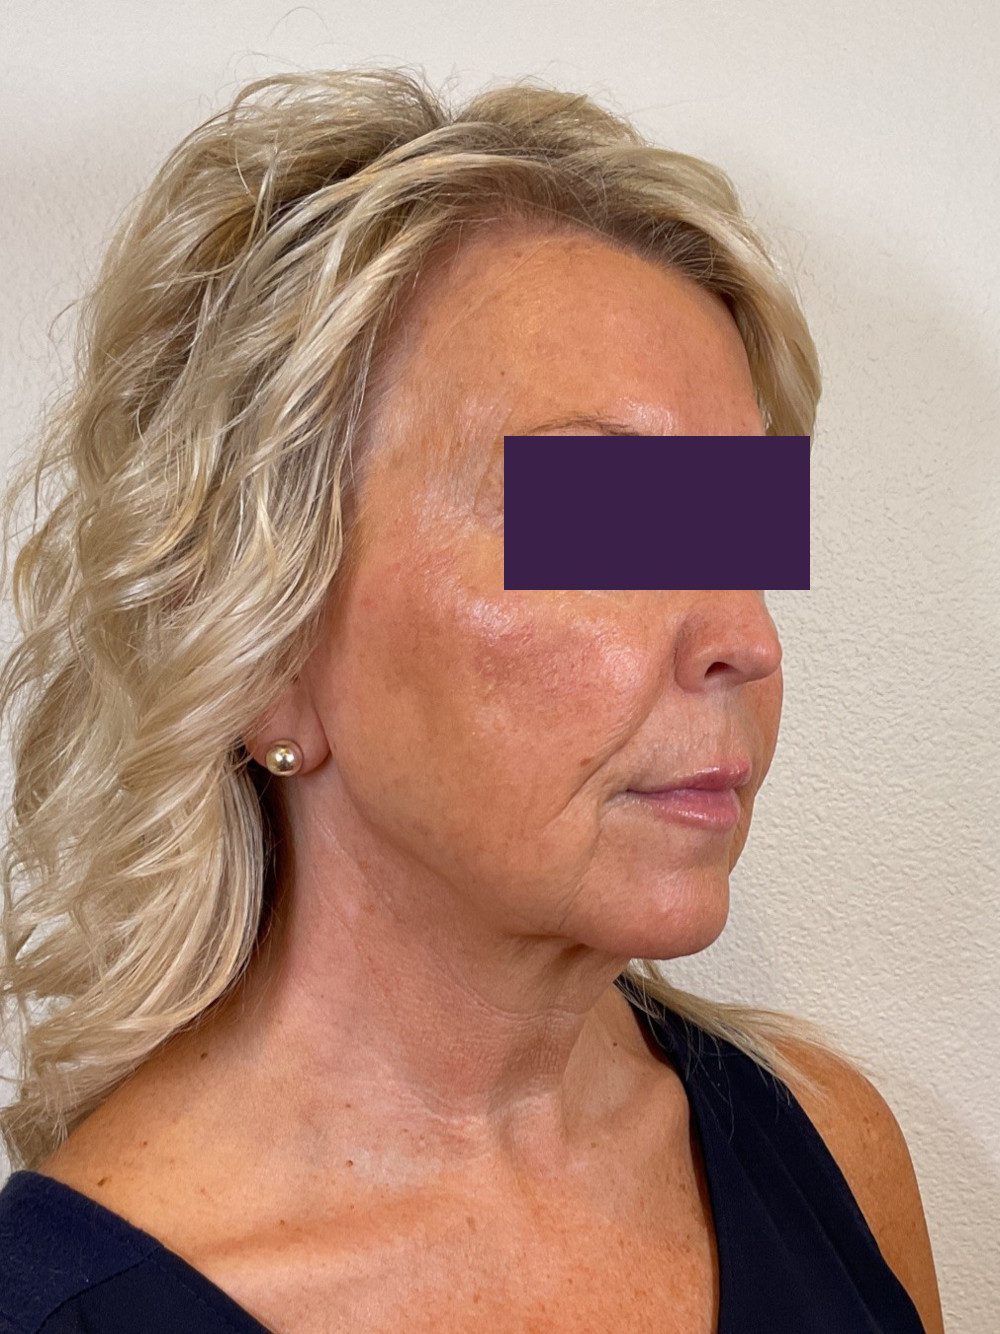 Facial Fillers Patient Photo - Case 4105 - after view-2